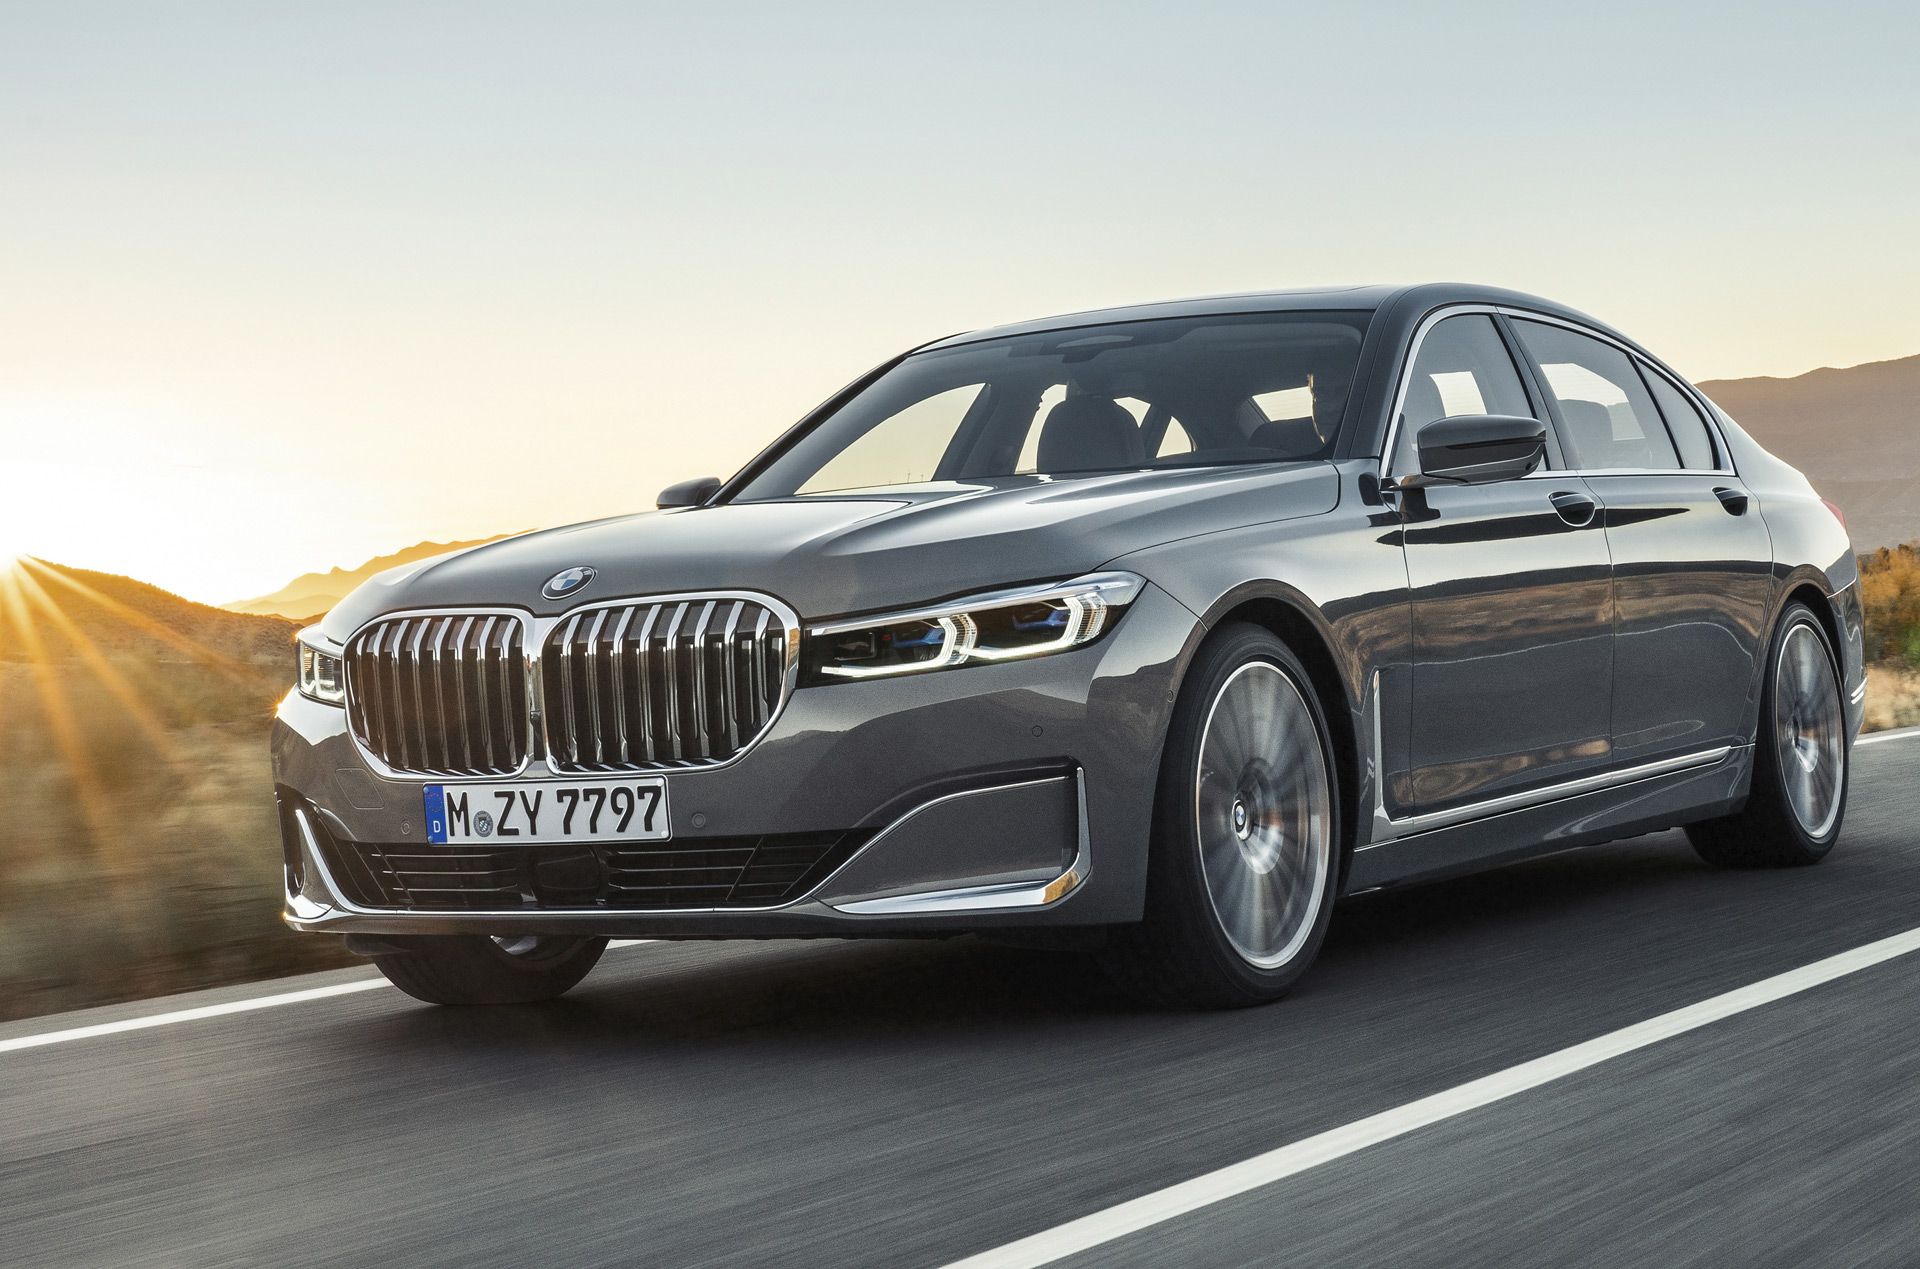 BMW 7 Series on the highway